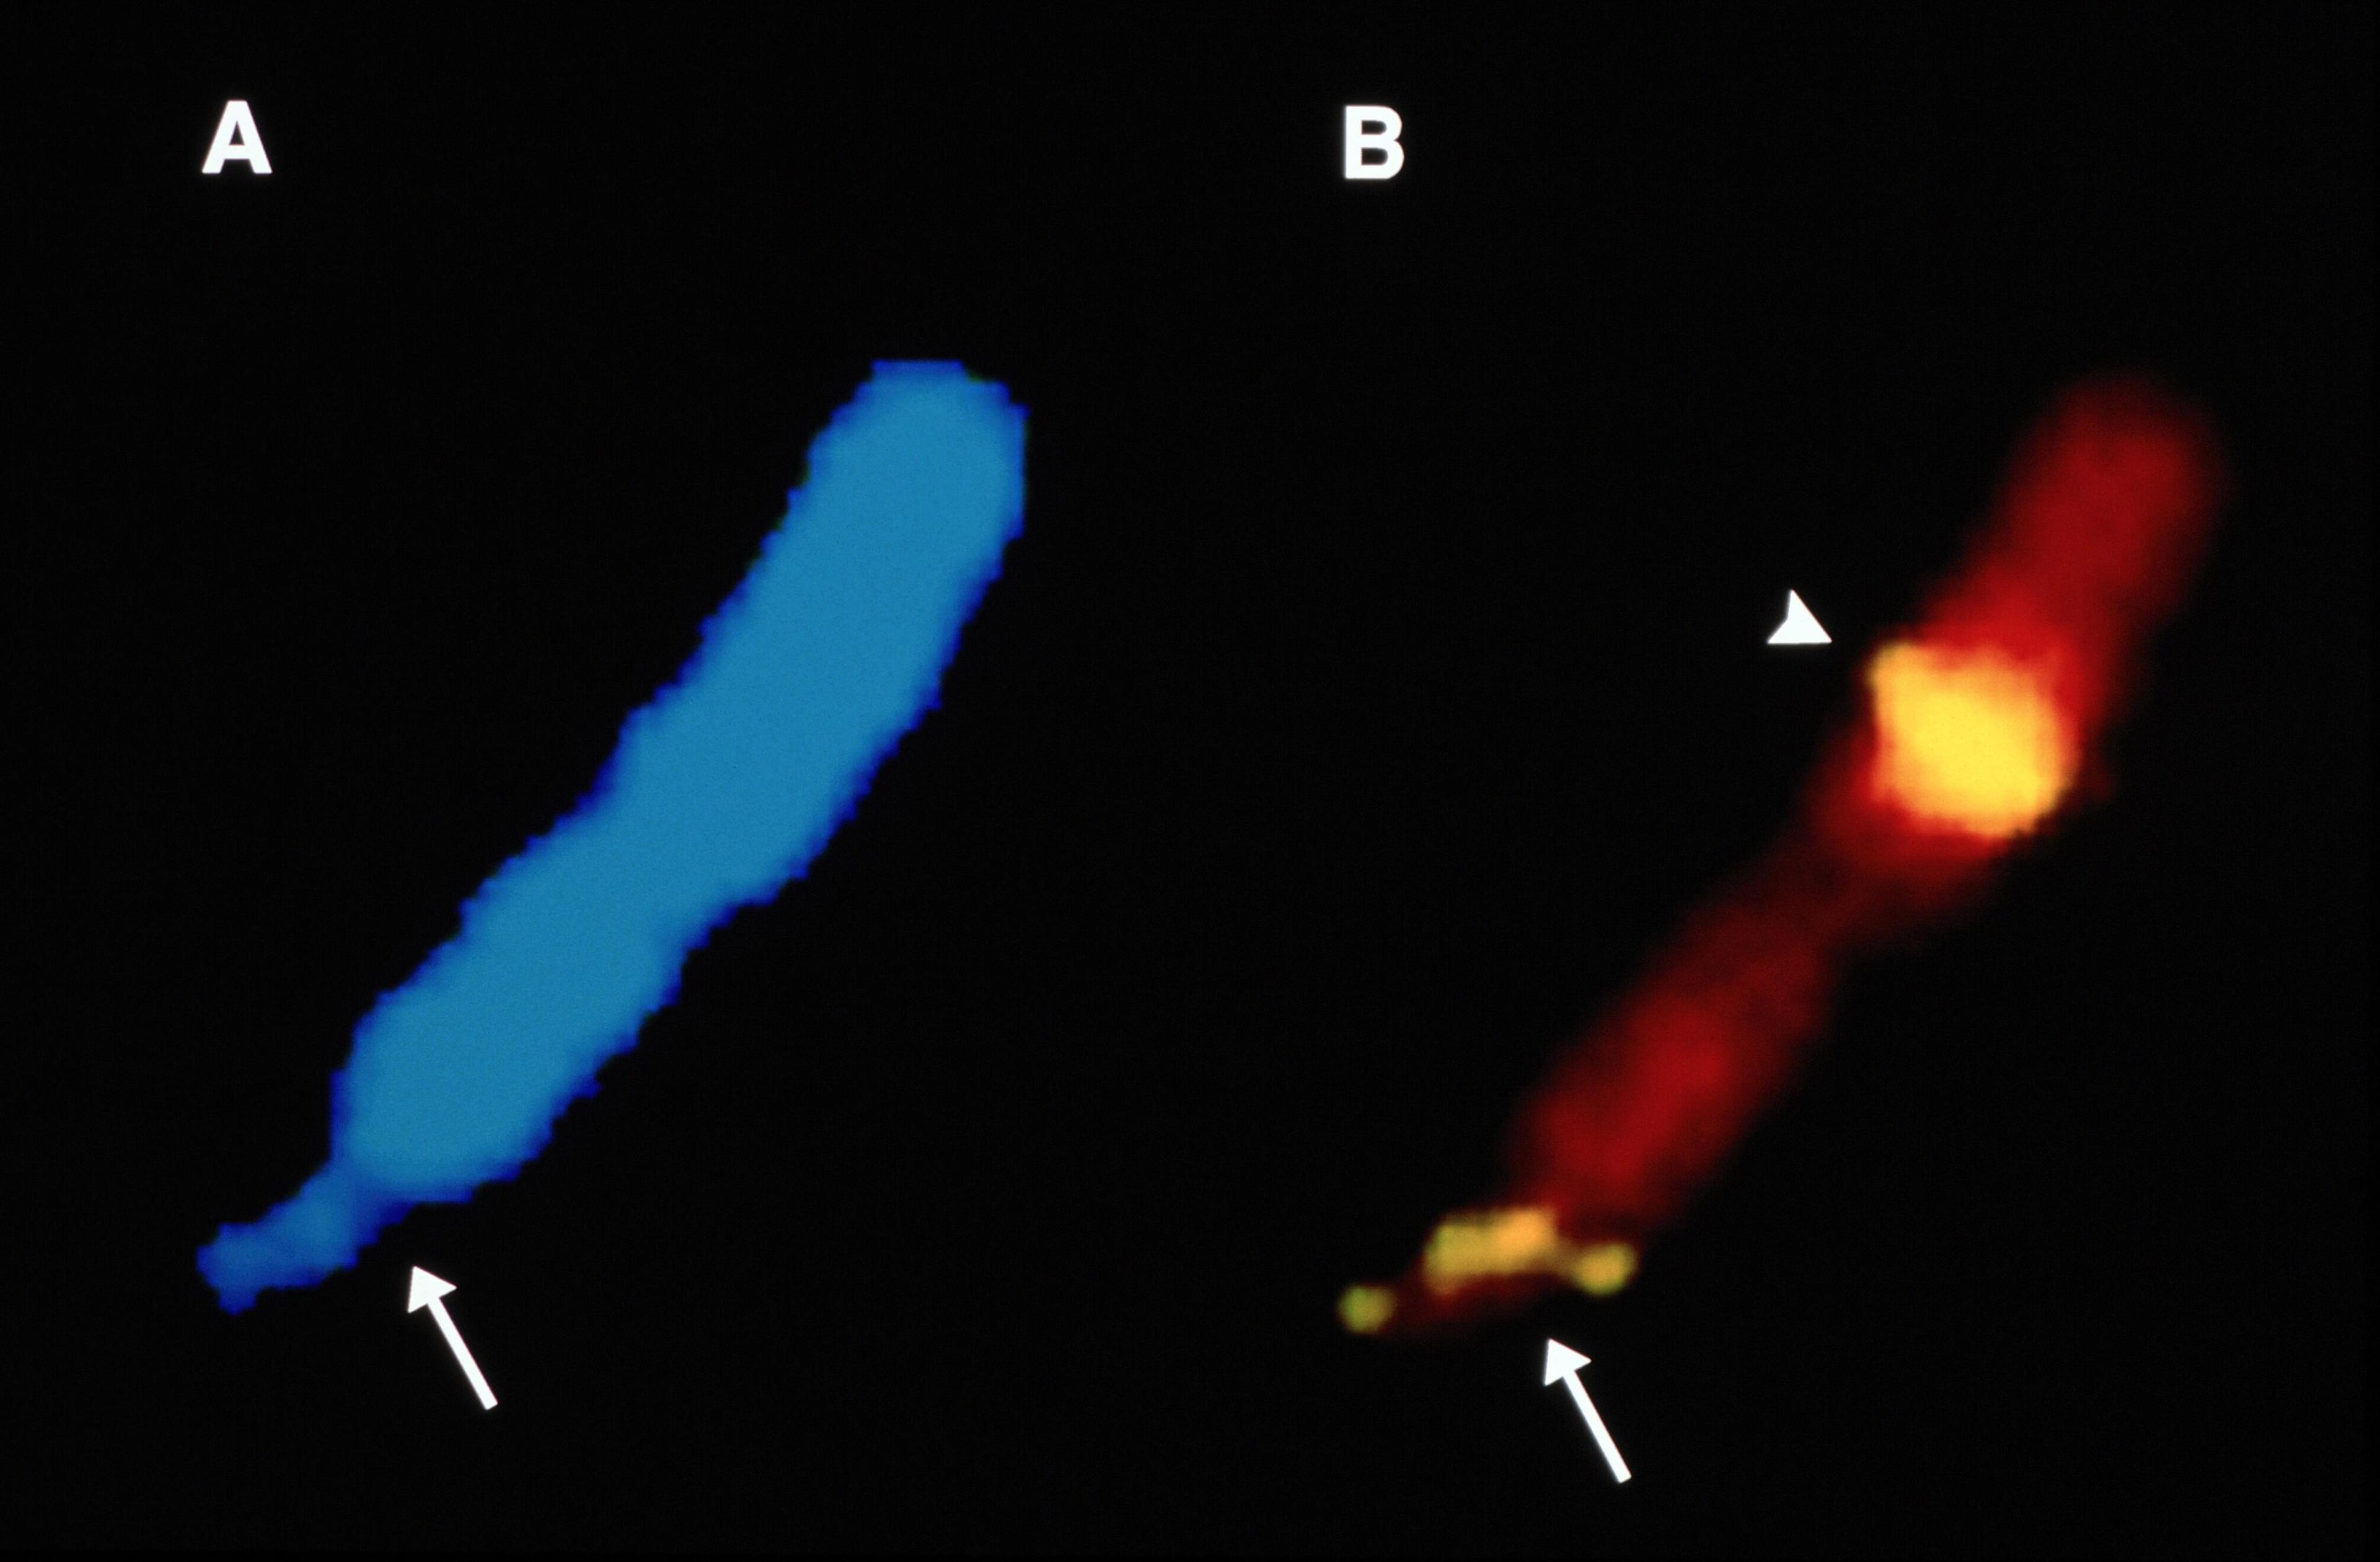 Fragile X syndrome is caused by an unusual mutation on the FMR1 gene. The mutation consists of a three-letter DNA repeat that causes structural changes, toward the end of X chromosome, that can be seen with the naked eye. The arrows mark the fragile sites on the chromosomes. Credit: Dr. Ben Oostra (CC0 1.0 Universal)